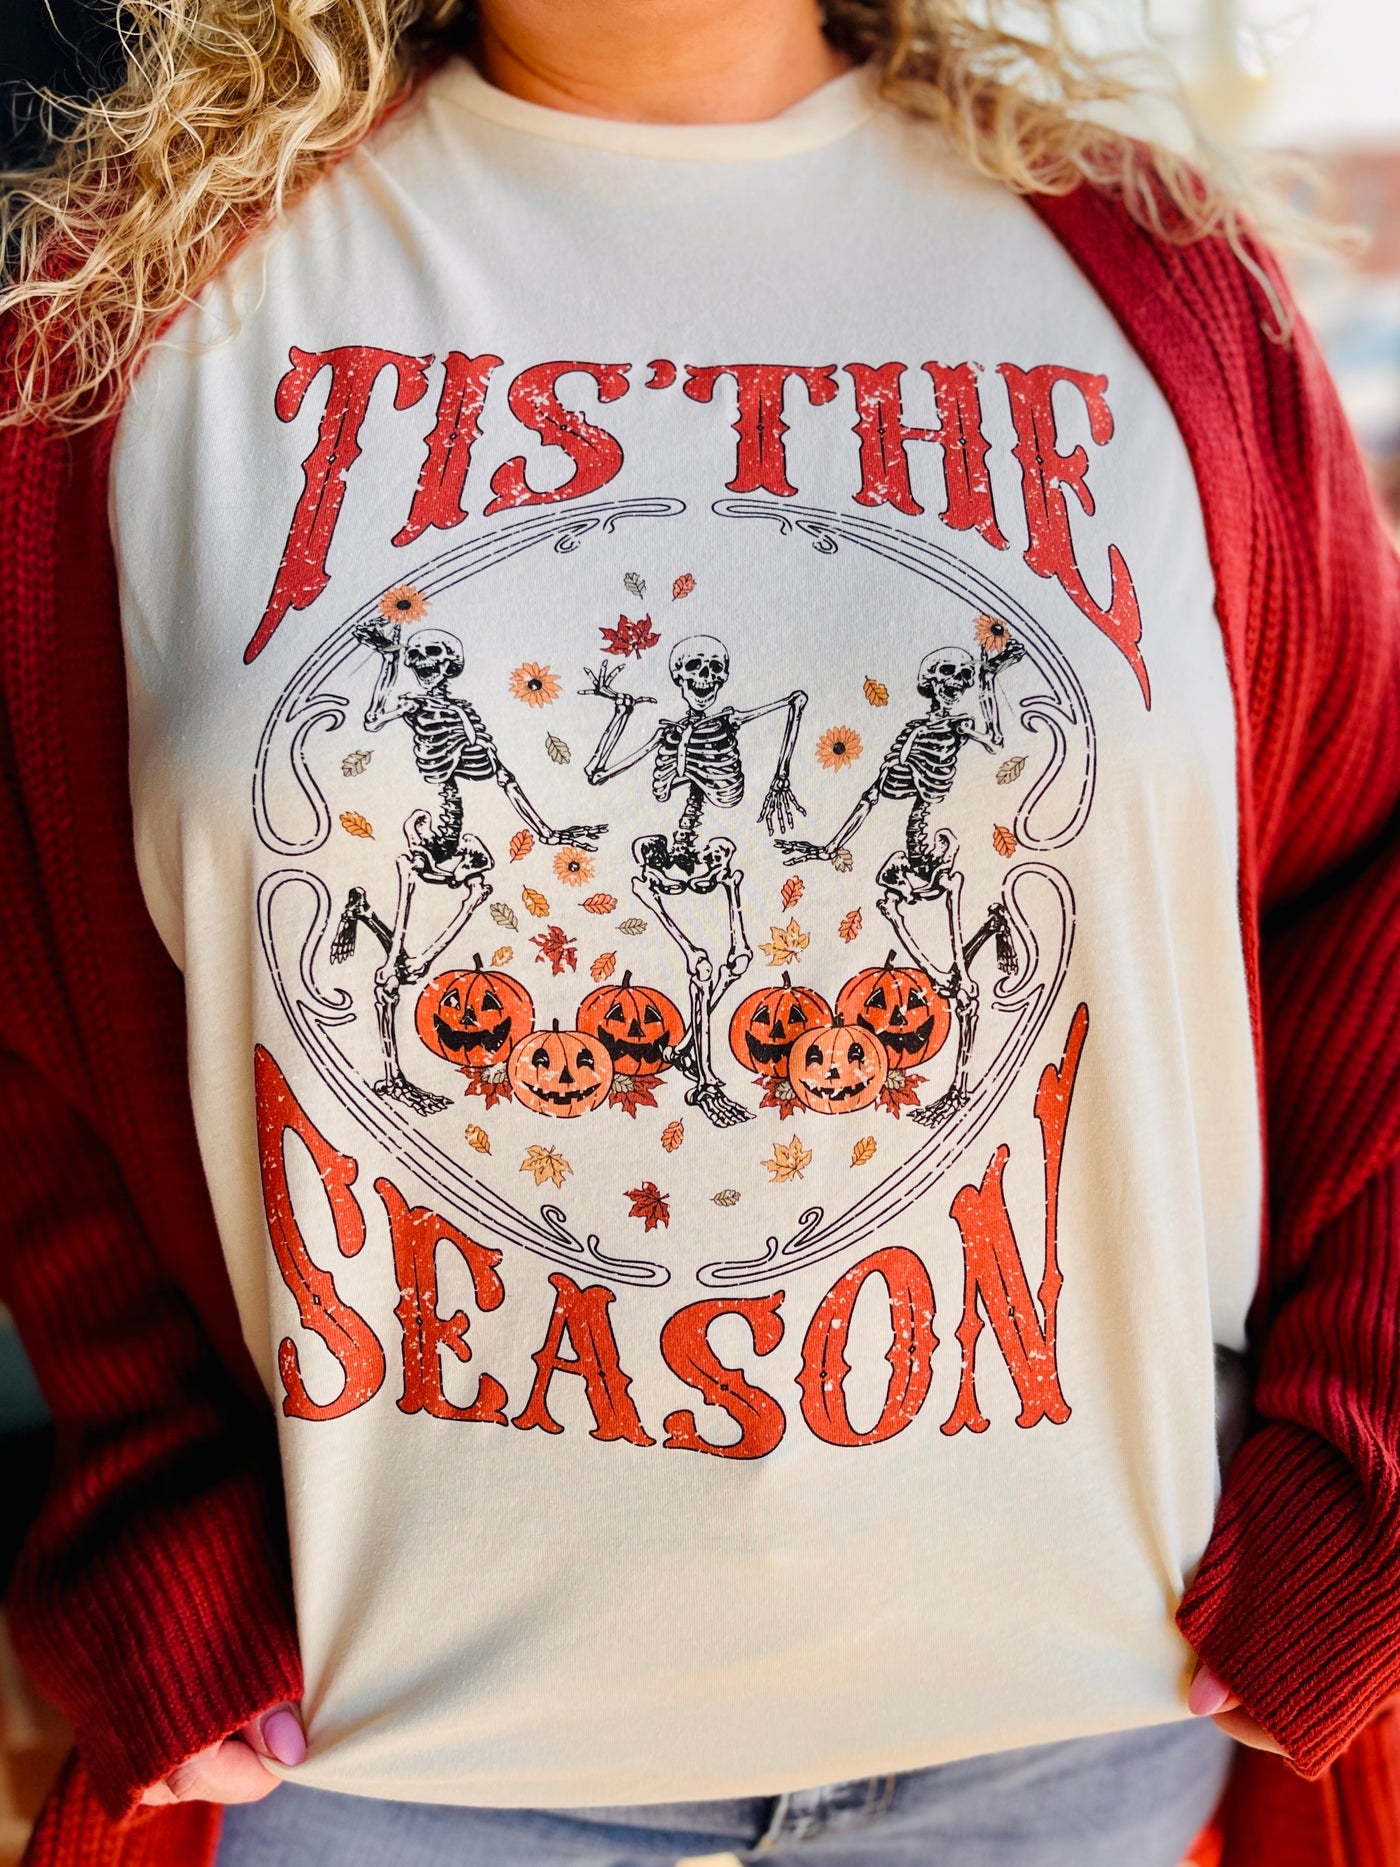 Tis The Season Graphic Tee-Harps & Oli-Shop Anchored Bliss Women's Boutique Clothing Store